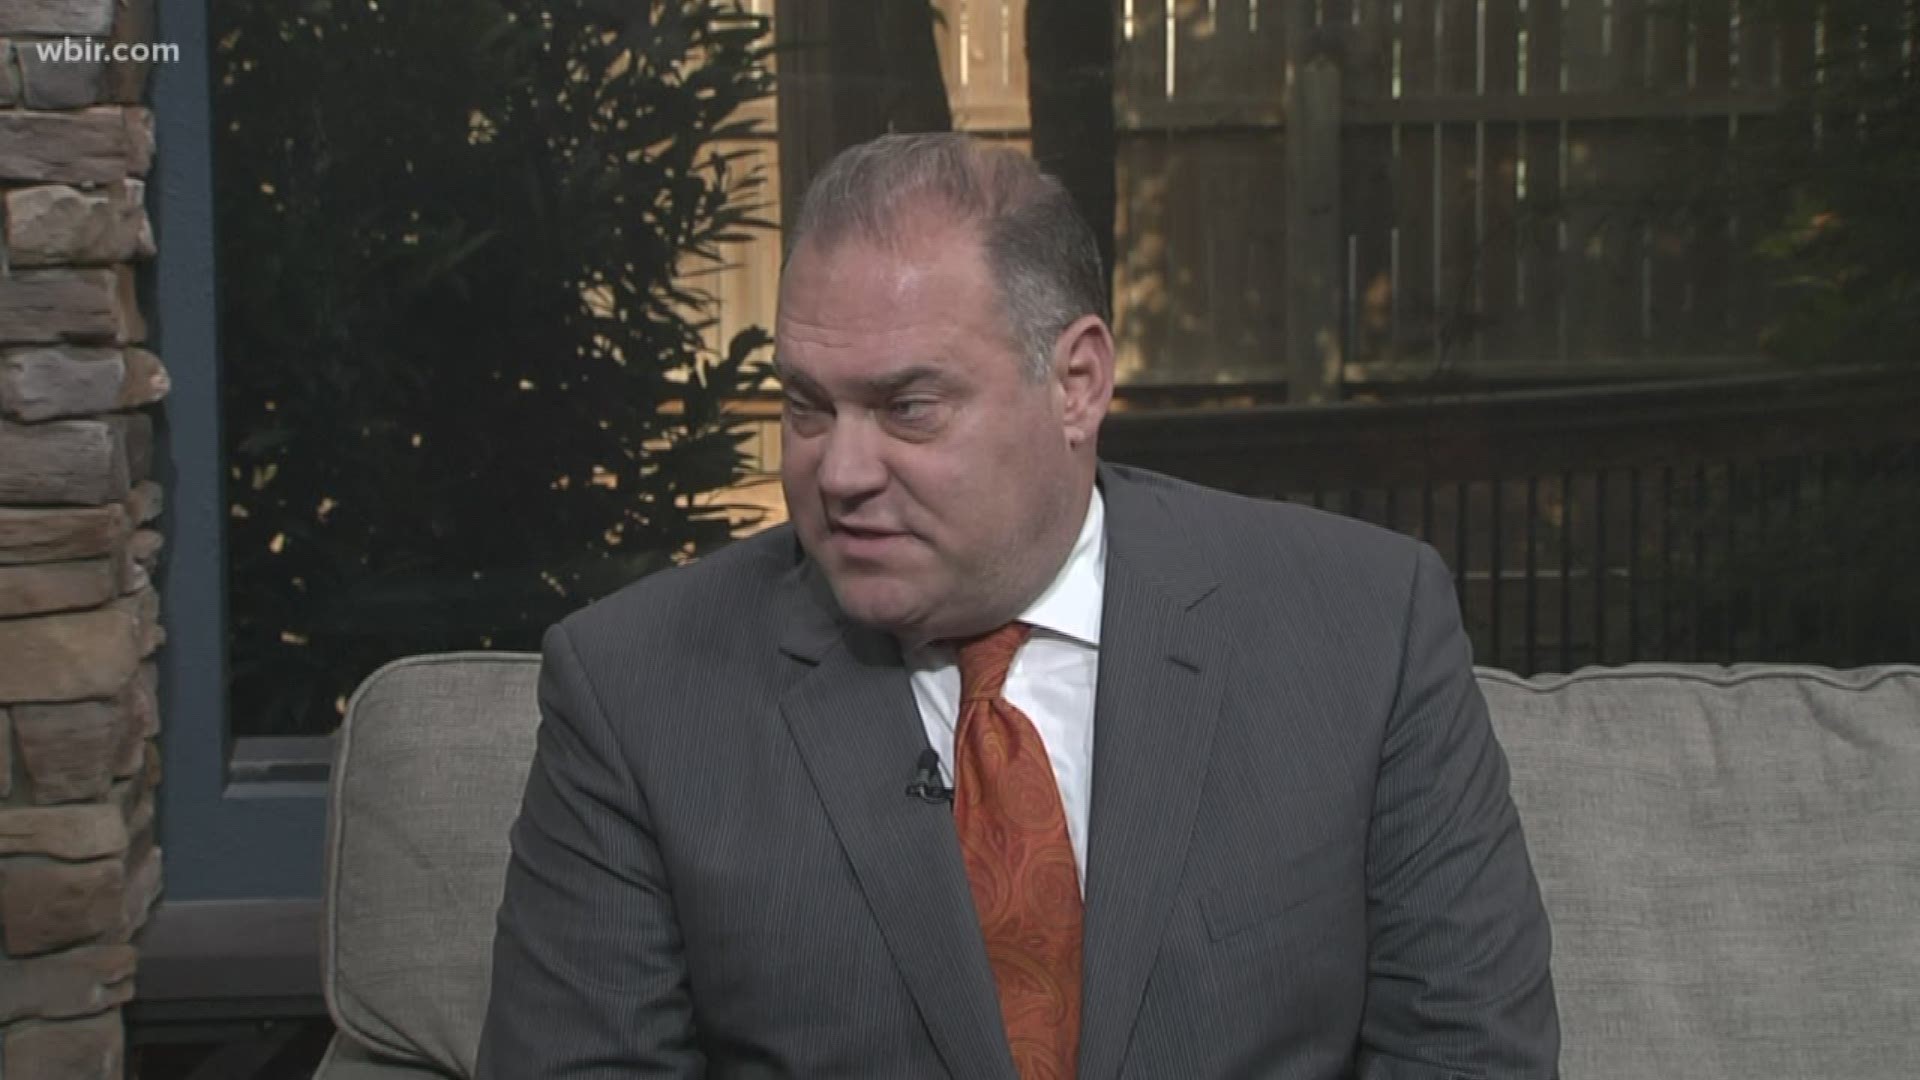 Legal expert and Inside Tennessee panelist Don Bosch joins us now for an analysis of what happened in court Tuesday.